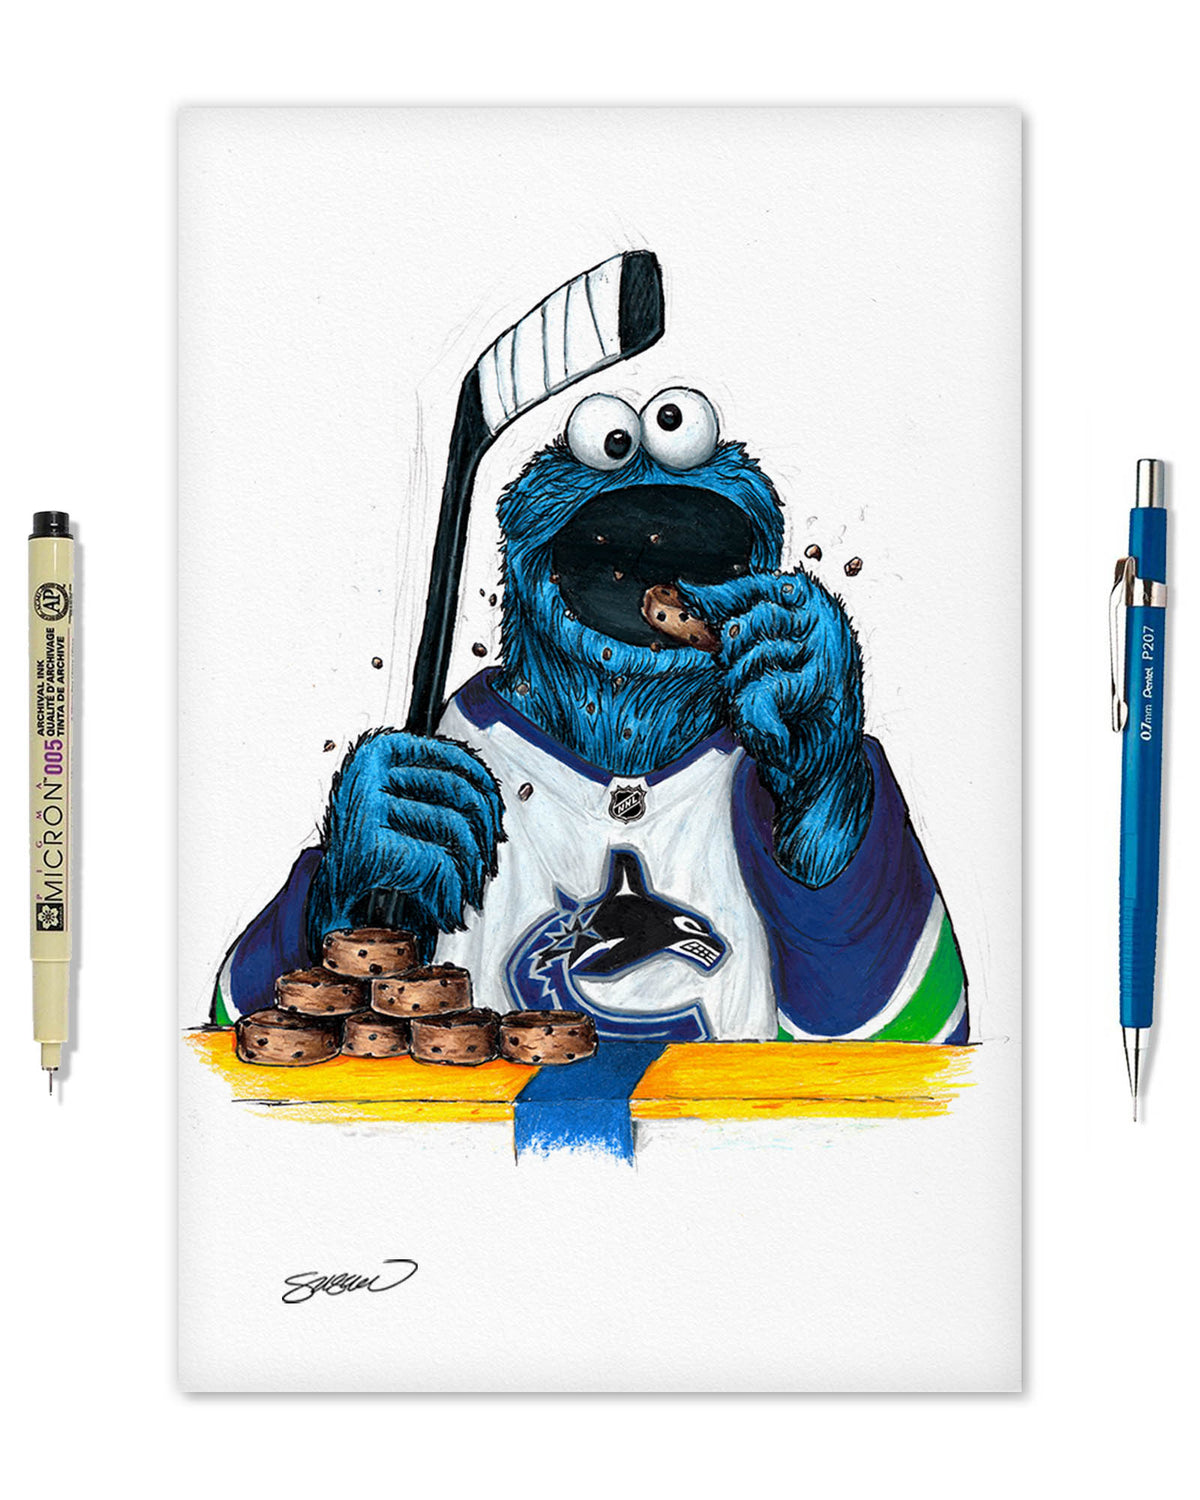 Cookie Monster x NHL Canucks Limited Edition Fine Art Print